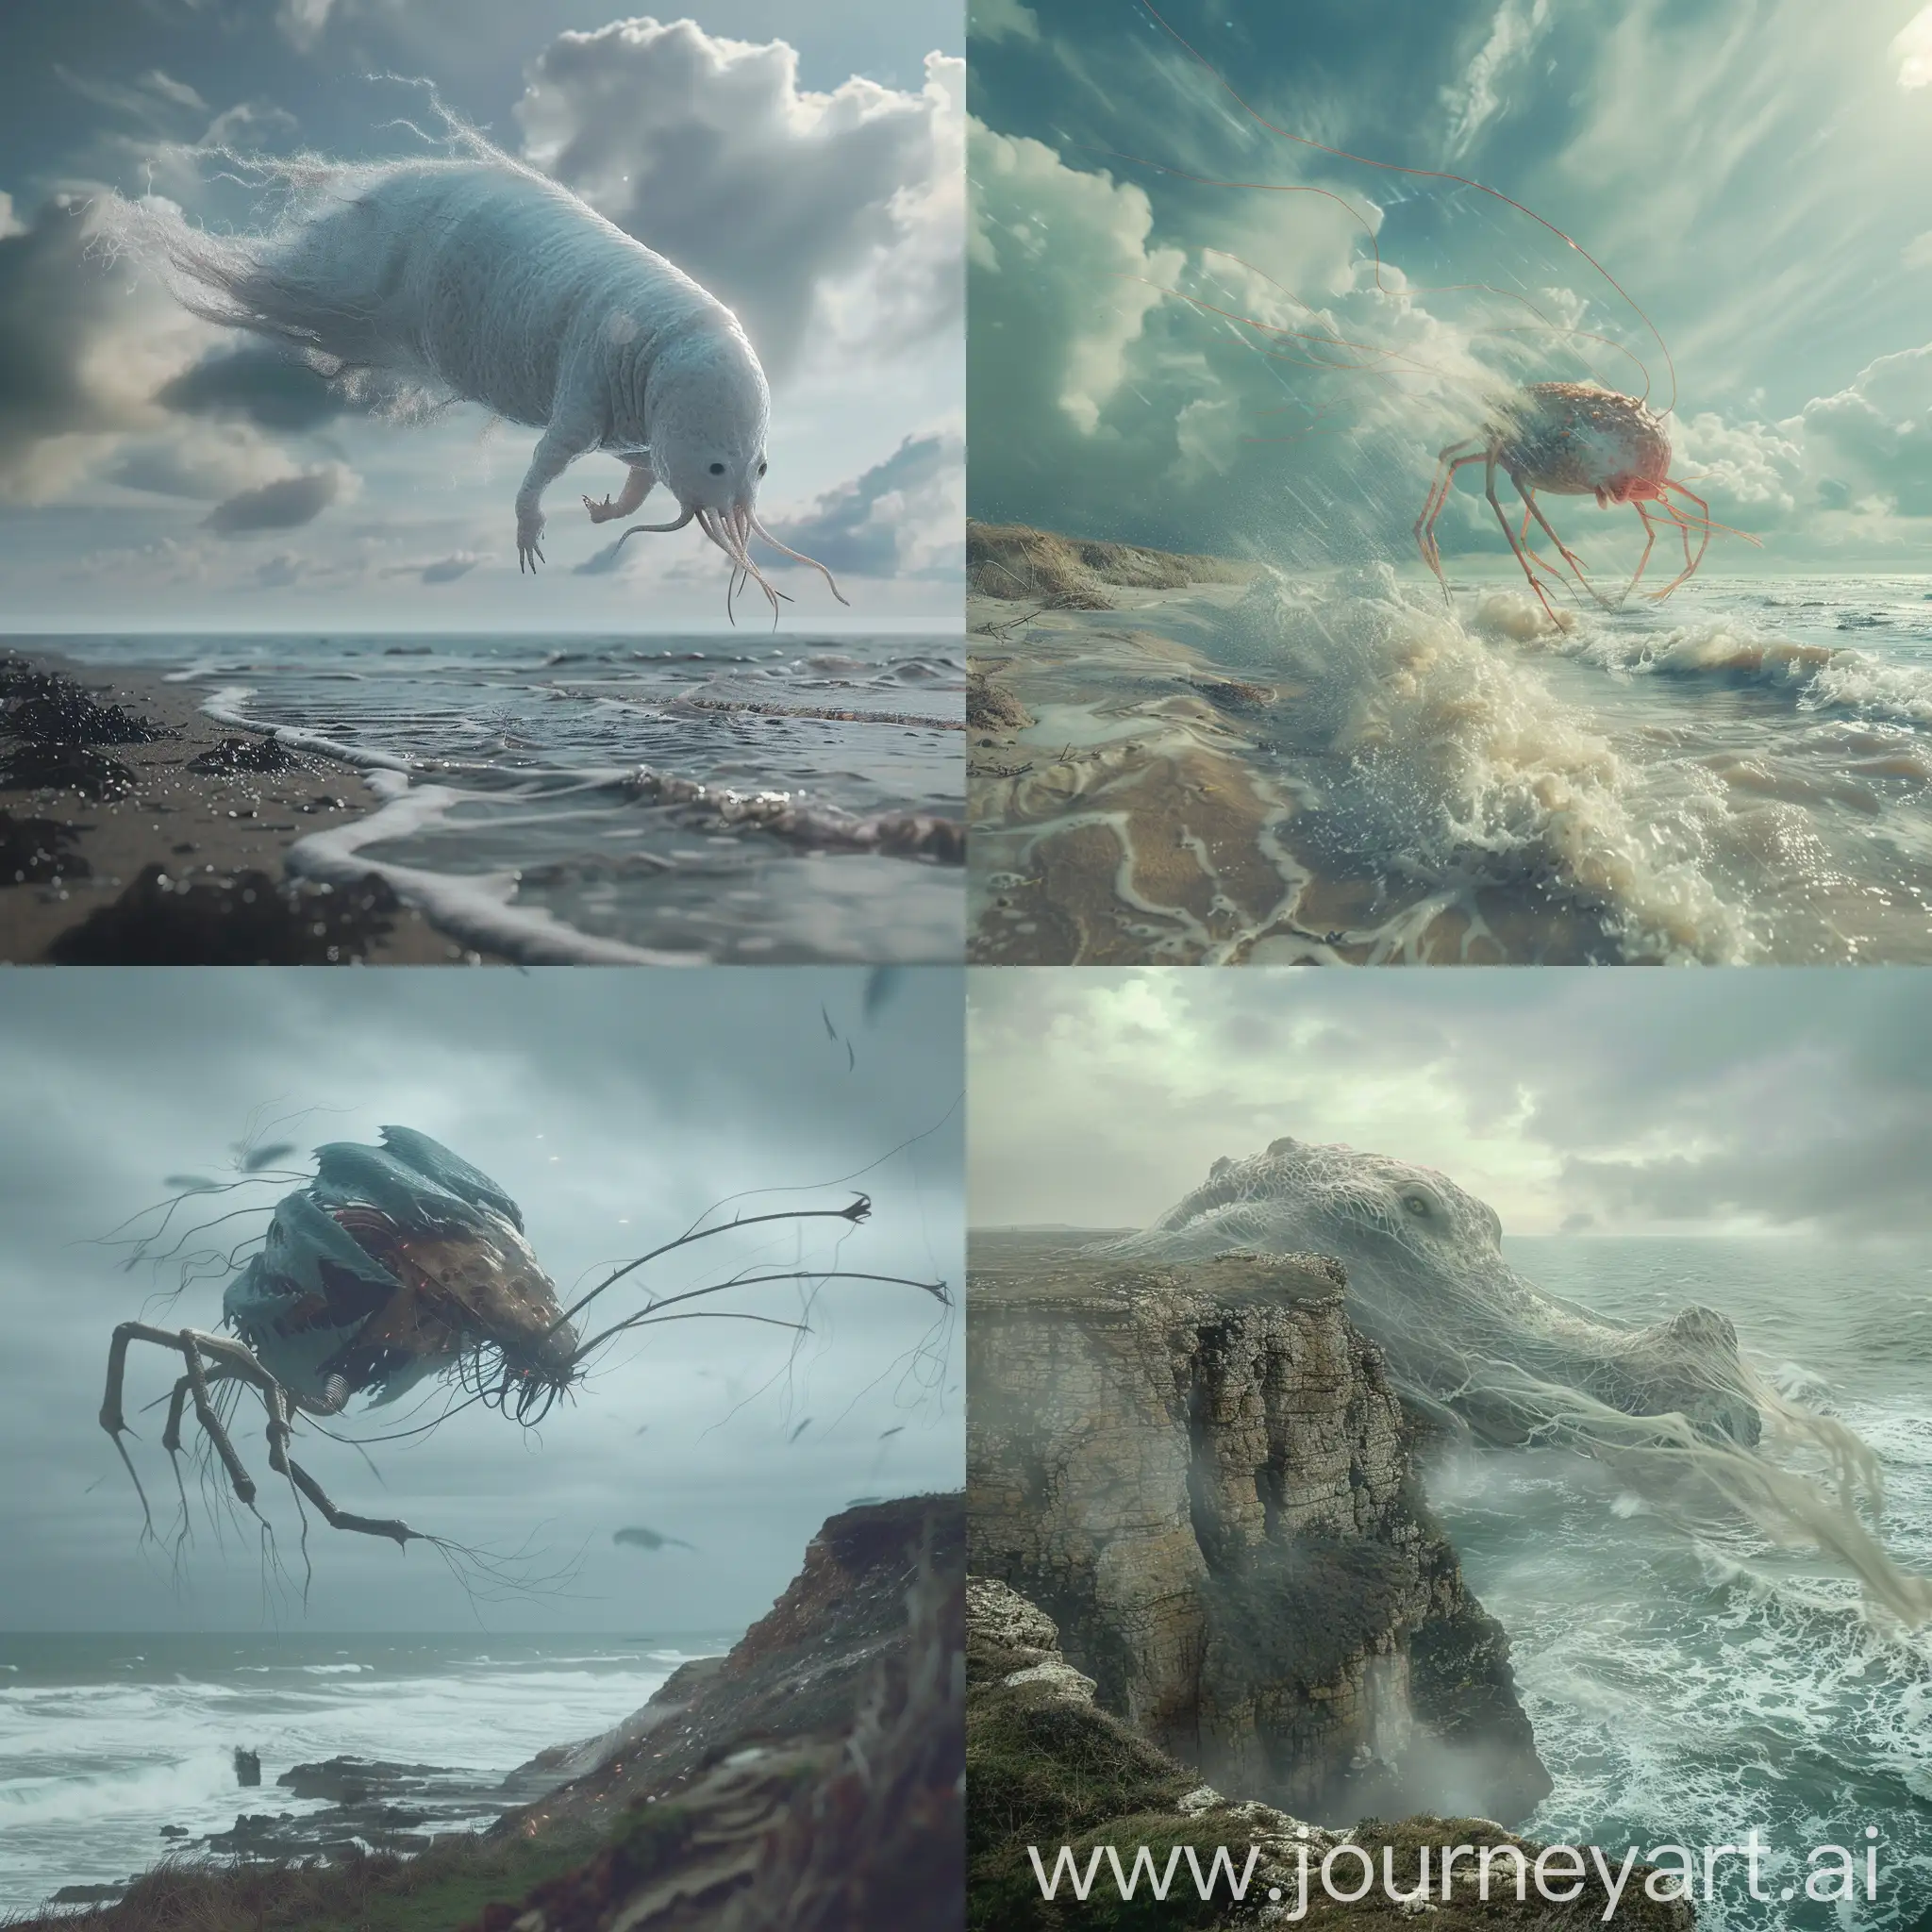 Mystical-Creature-Roaming-a-Surreal-Landscape-with-Elements-of-Nature